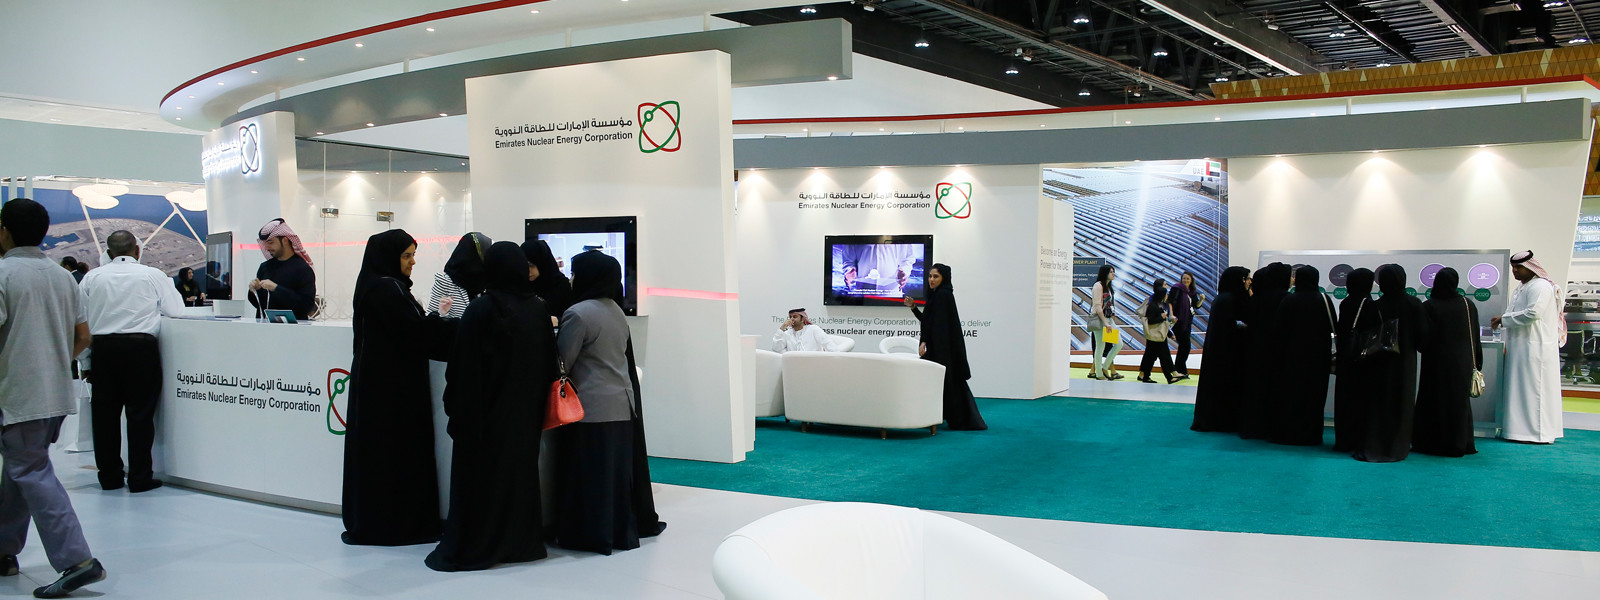 WFES 2014